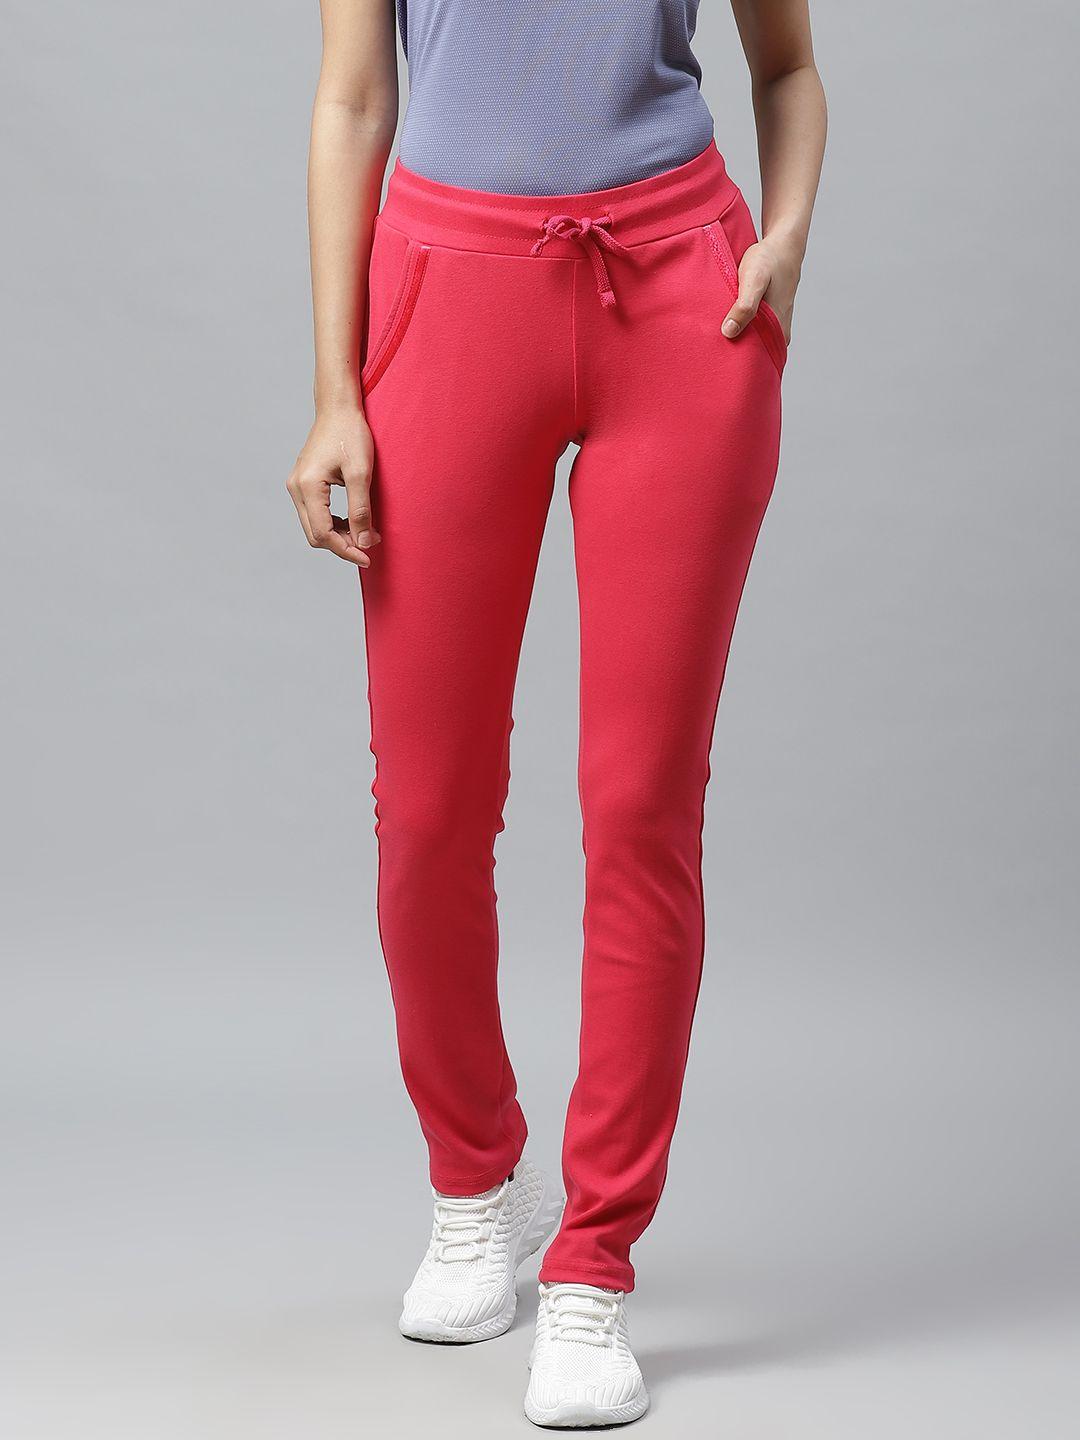 cayman-women-pink-solid-track-pants